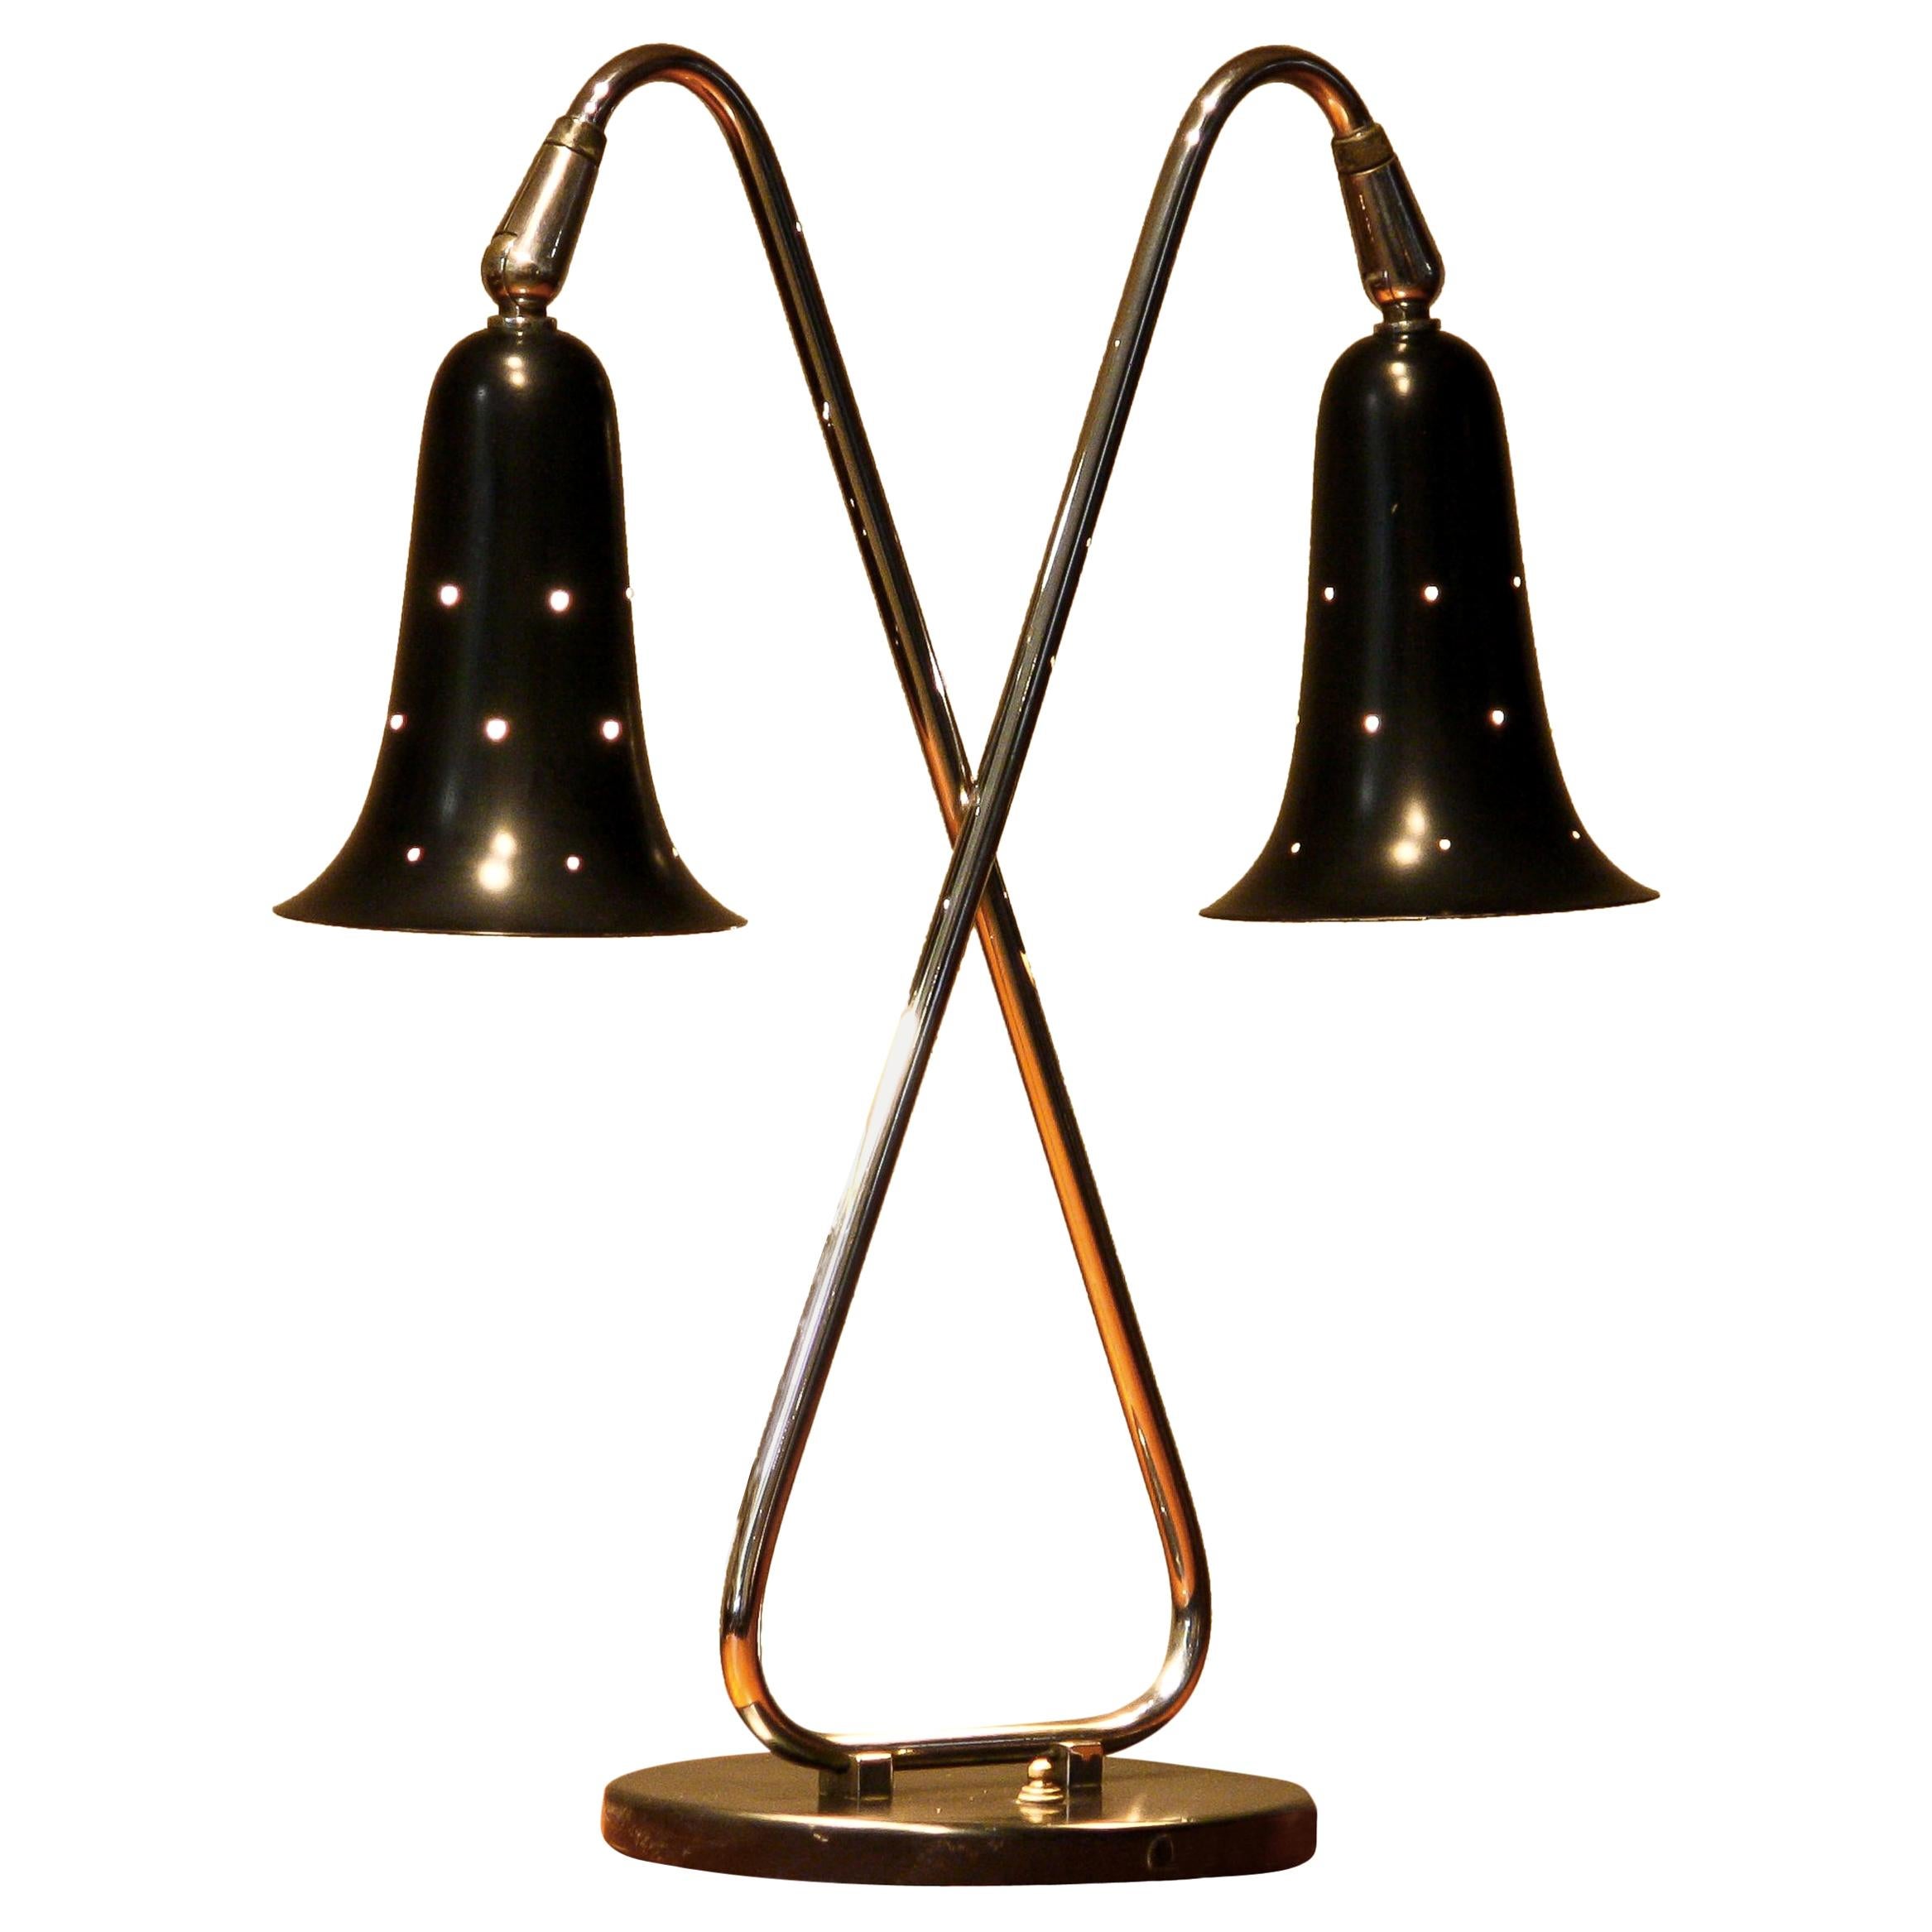 Central American 1950s, Two Shades Metal Black Lacquered and Chromed Desk/Table Lamp, USA